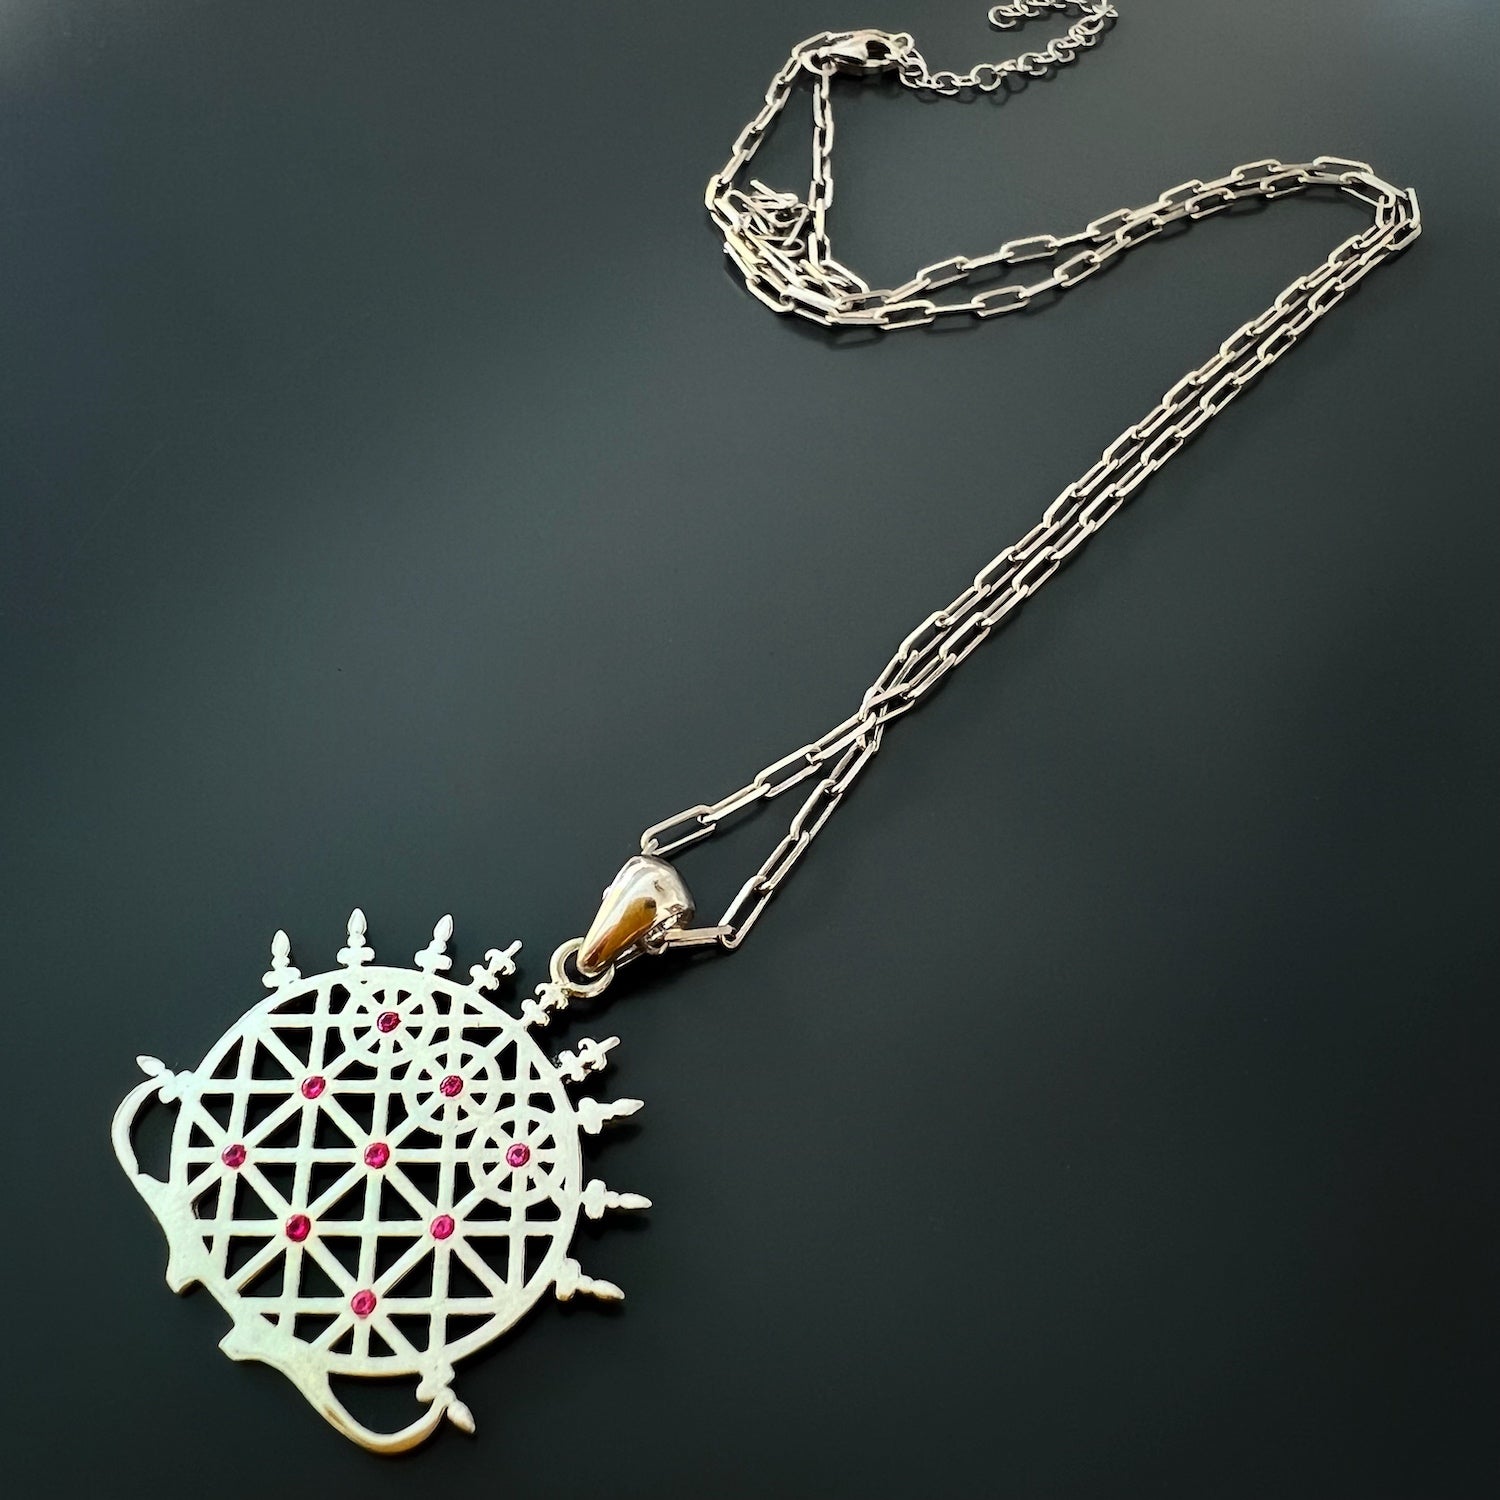 the Silver Hittite Sun Disc Necklace, showing the pendant resting close to the heart, symbolizing the importance of self-connection and inner warmth.